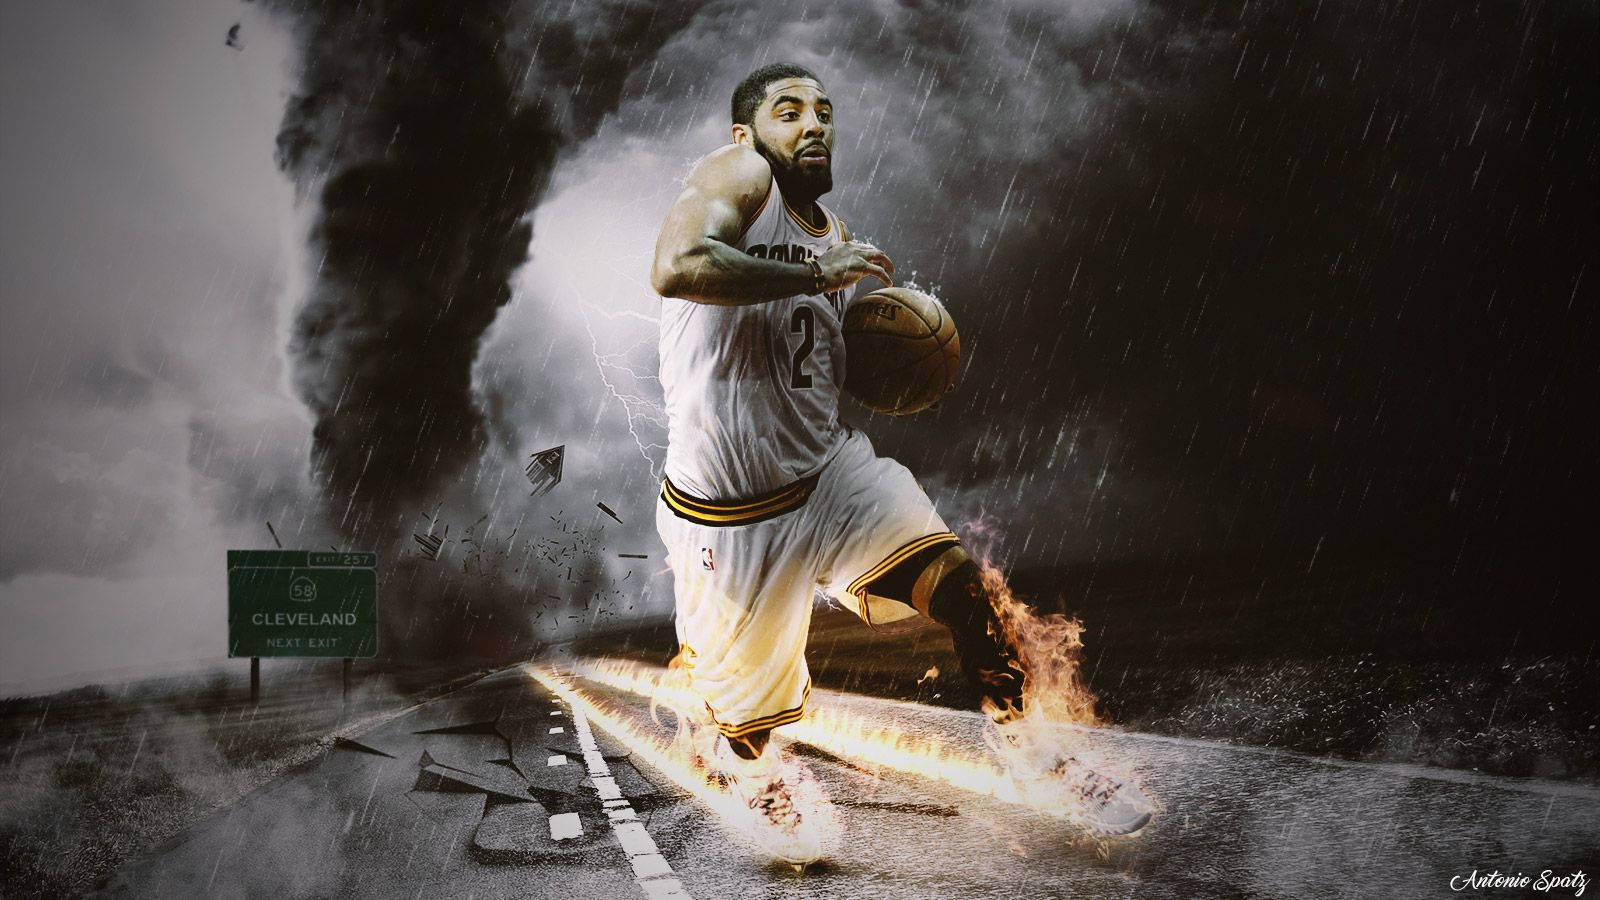 Kyrie Irving Playing While Raining Background